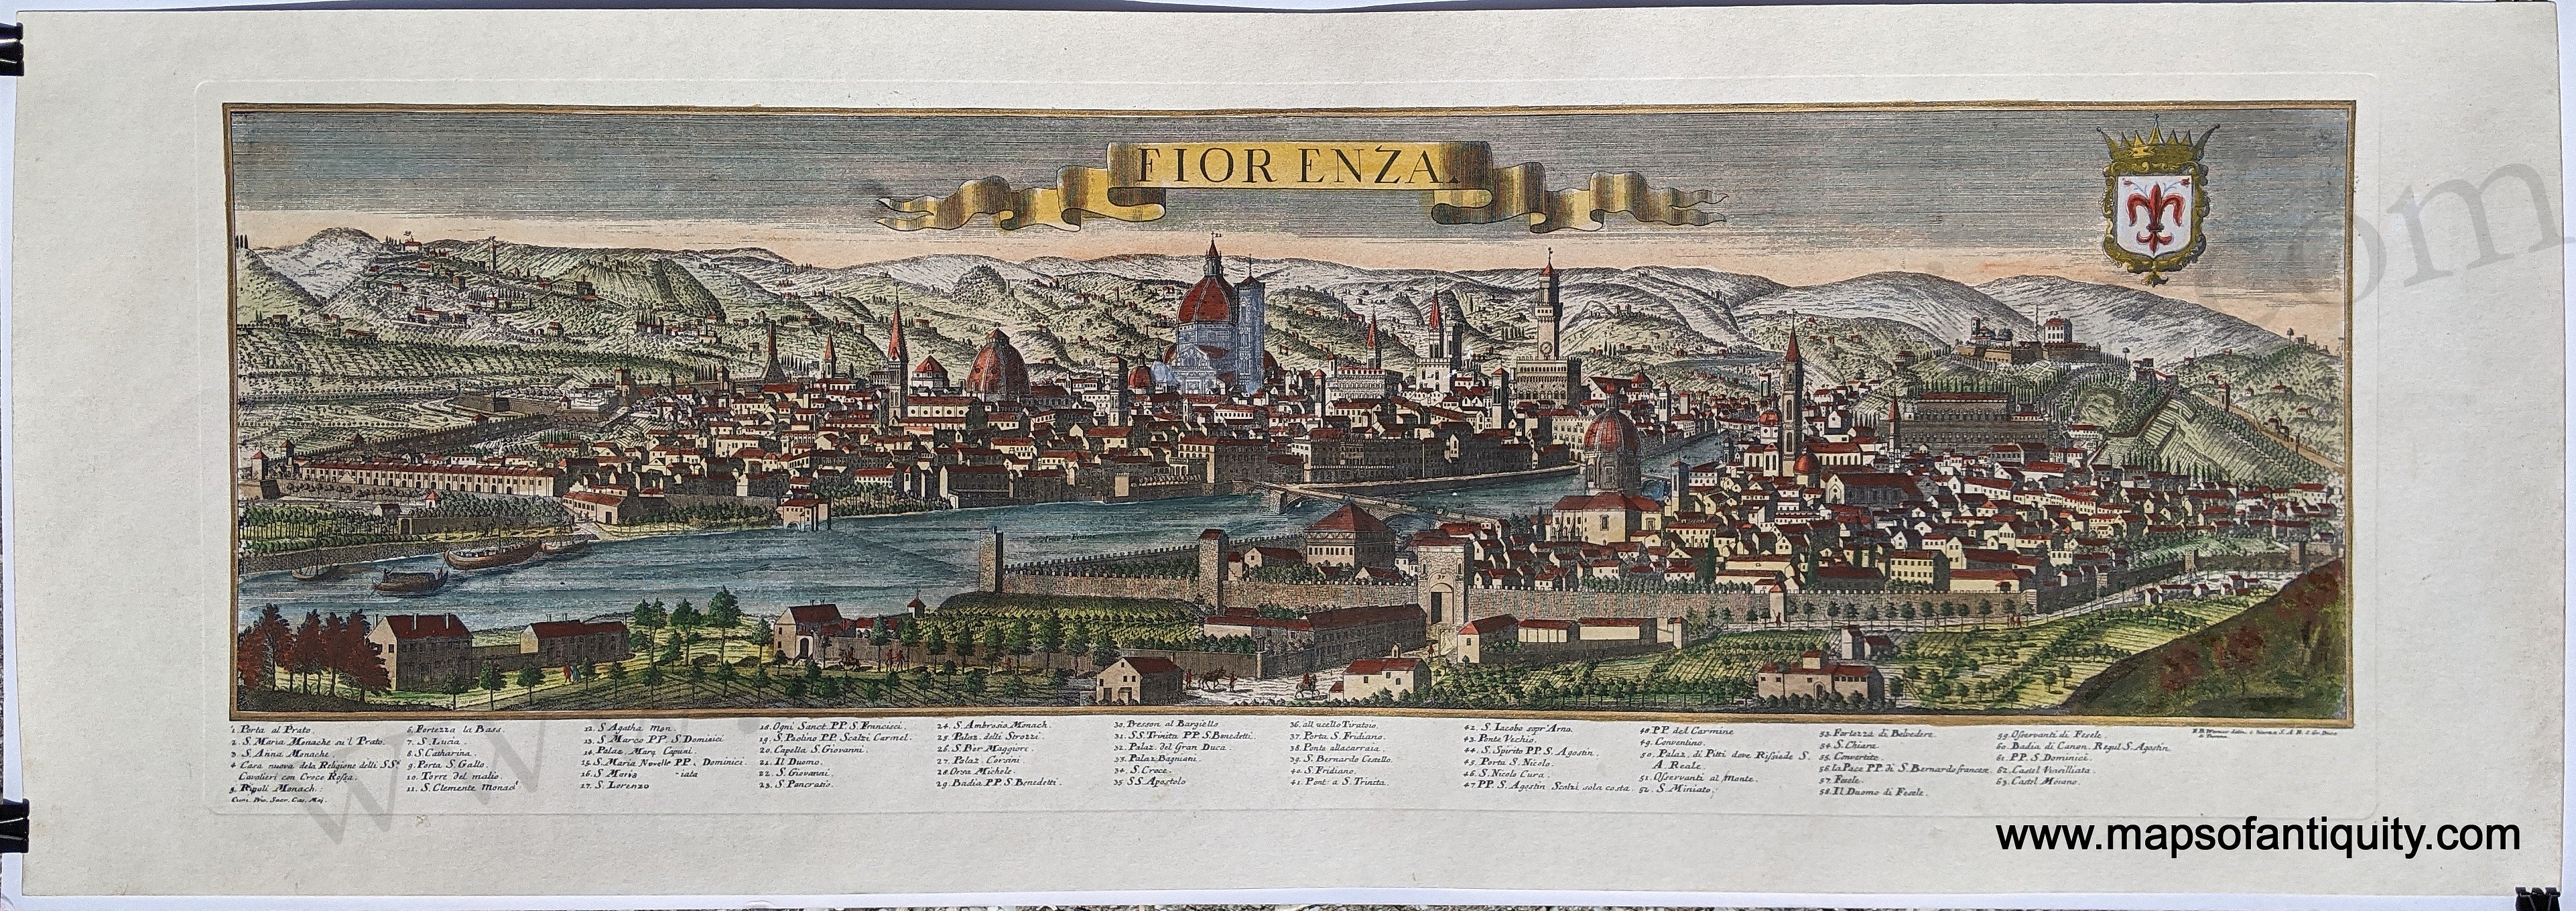 Fiorenza (Florence, Italy) - Reproduction Map (smaller size)